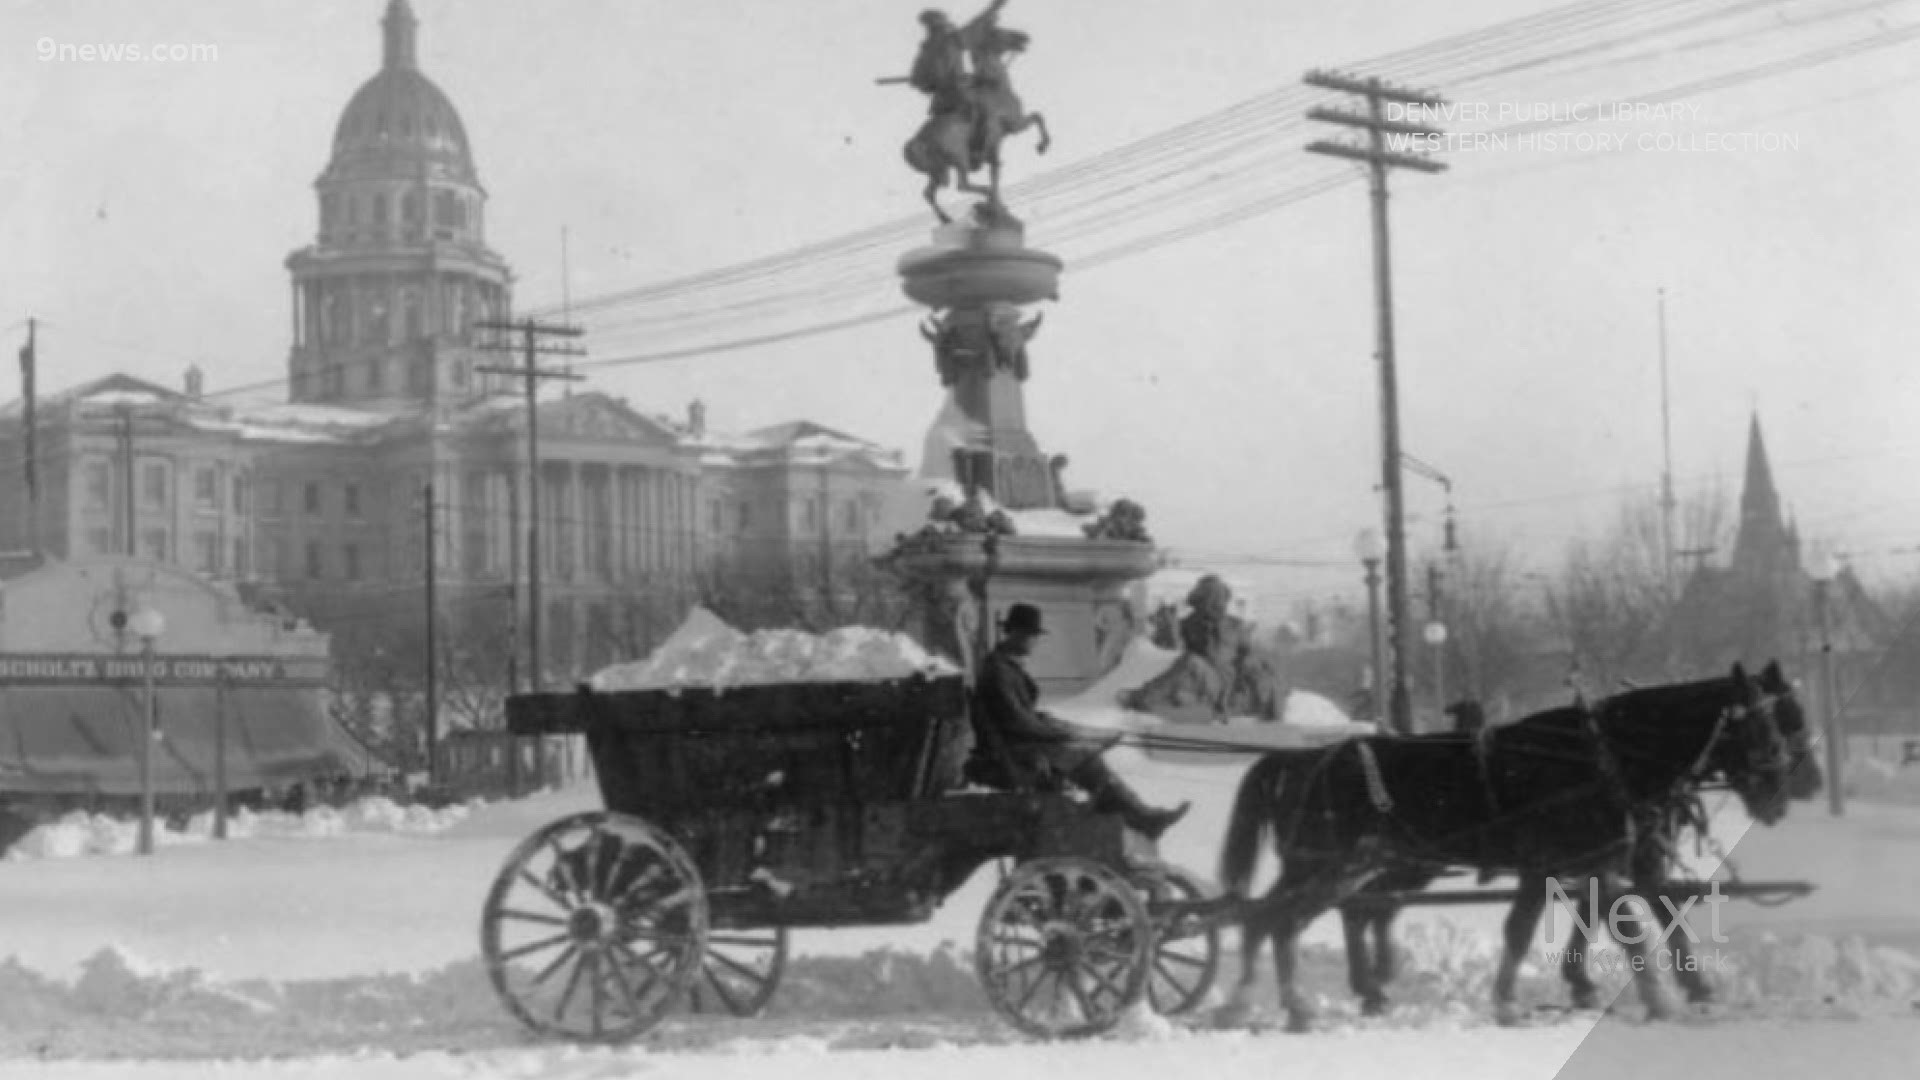 The epic snowfall of December 1913 impacted all of Colorado. In Denver, the problem wasn't just the storm; it was finding a place to put 47 inches of citywide snow.